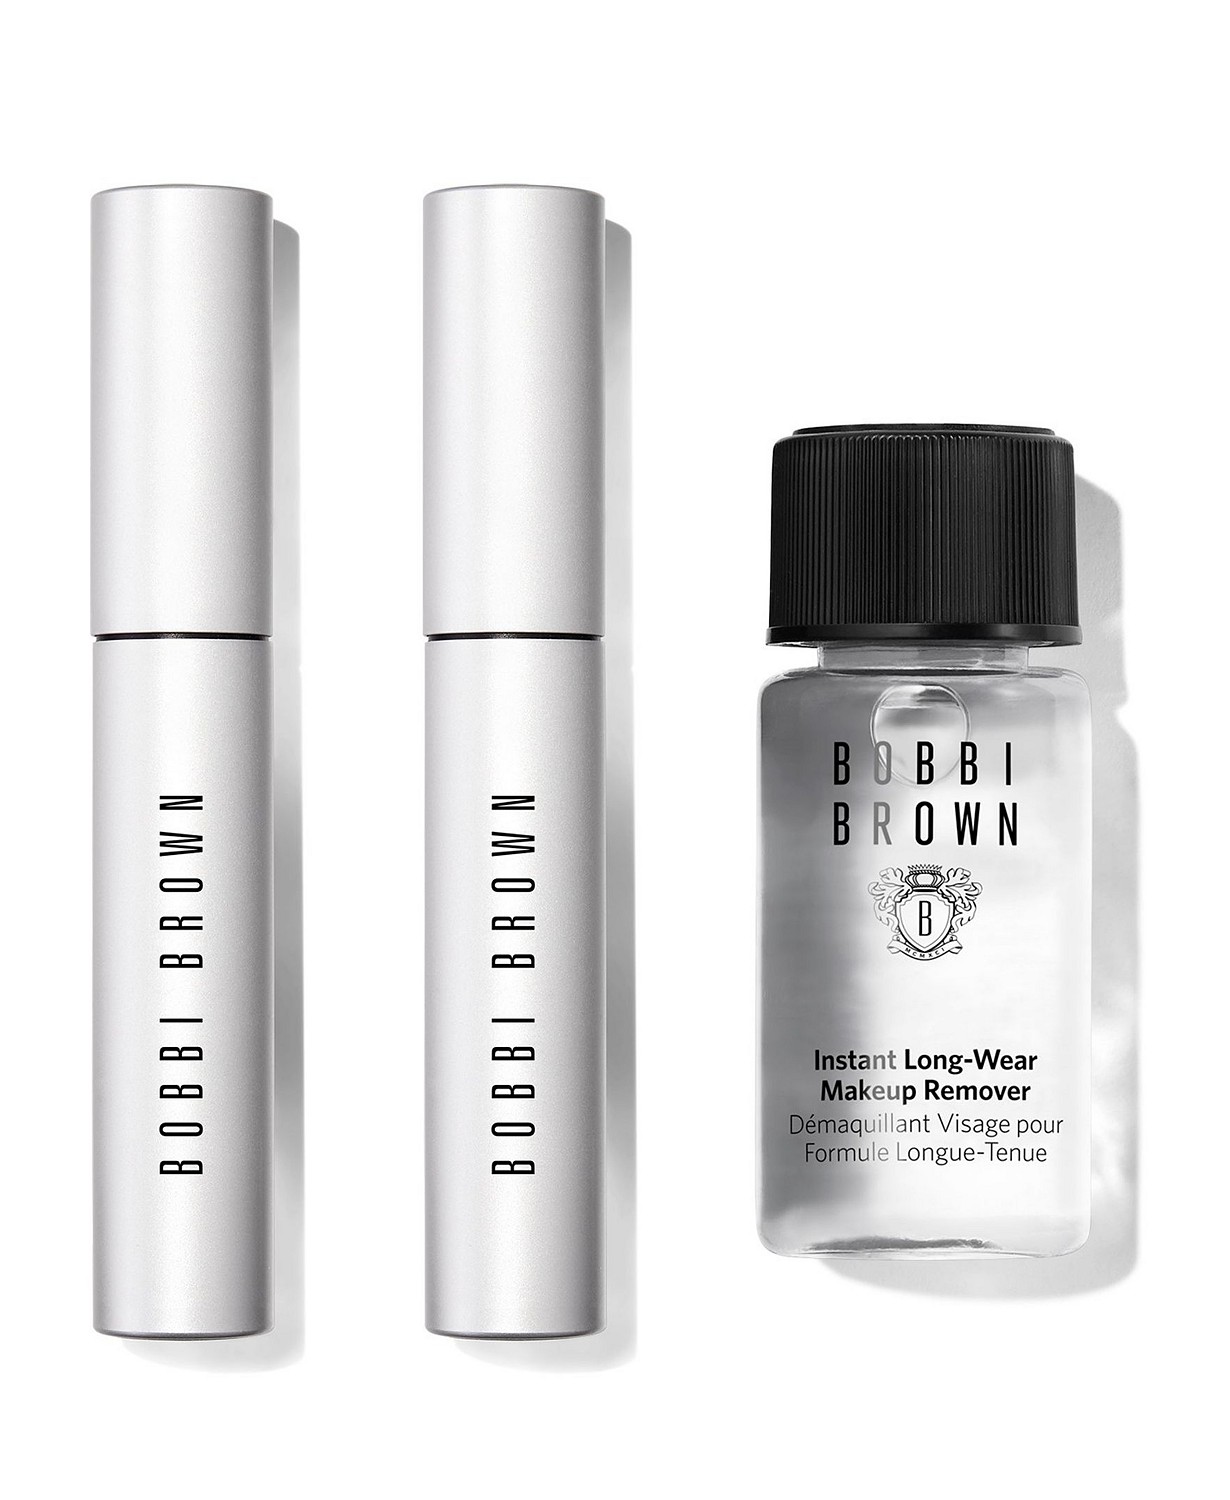 3-Pc Bobbi Brown All About Lashes Mascara Set (2 Mascaras & Makeup Remover) $17.50 + Free Store Pickup at Macy's or Free Shipping $25+